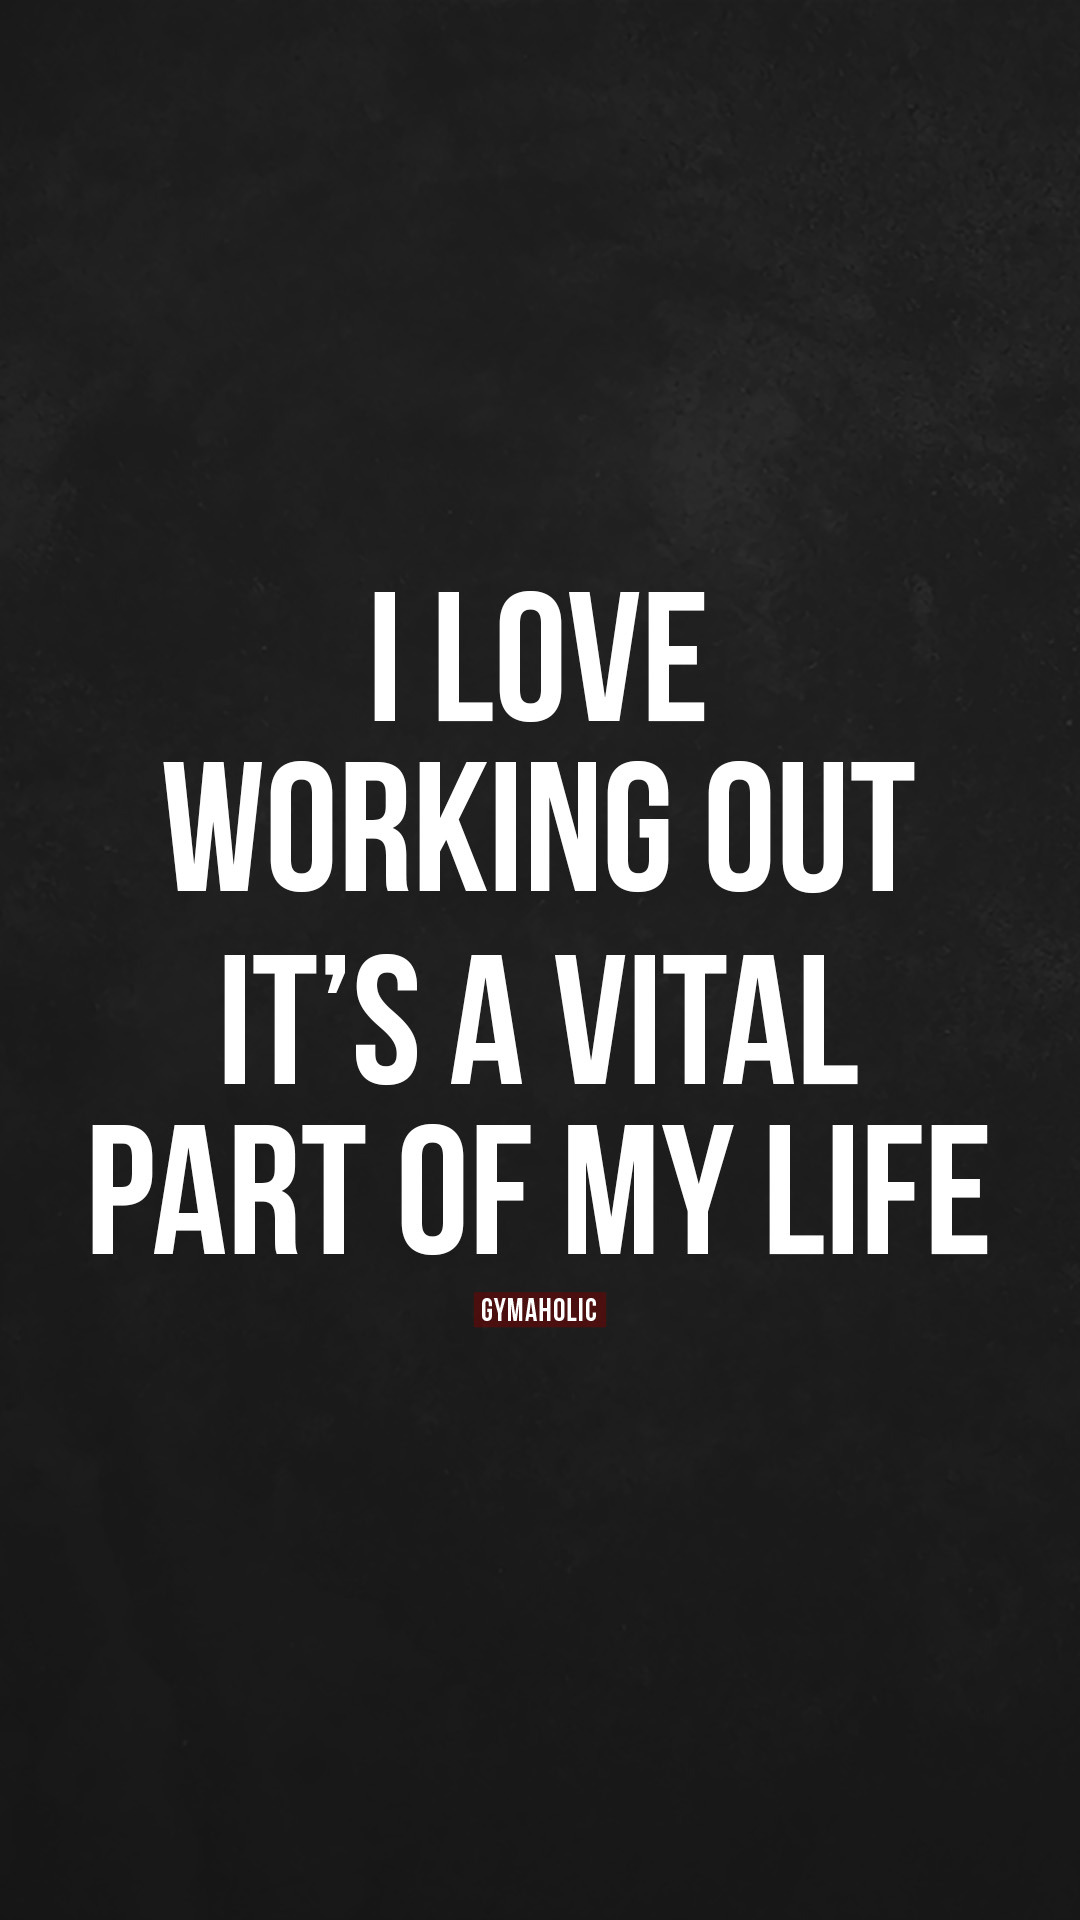 I love working out, it’s a vital part of my life